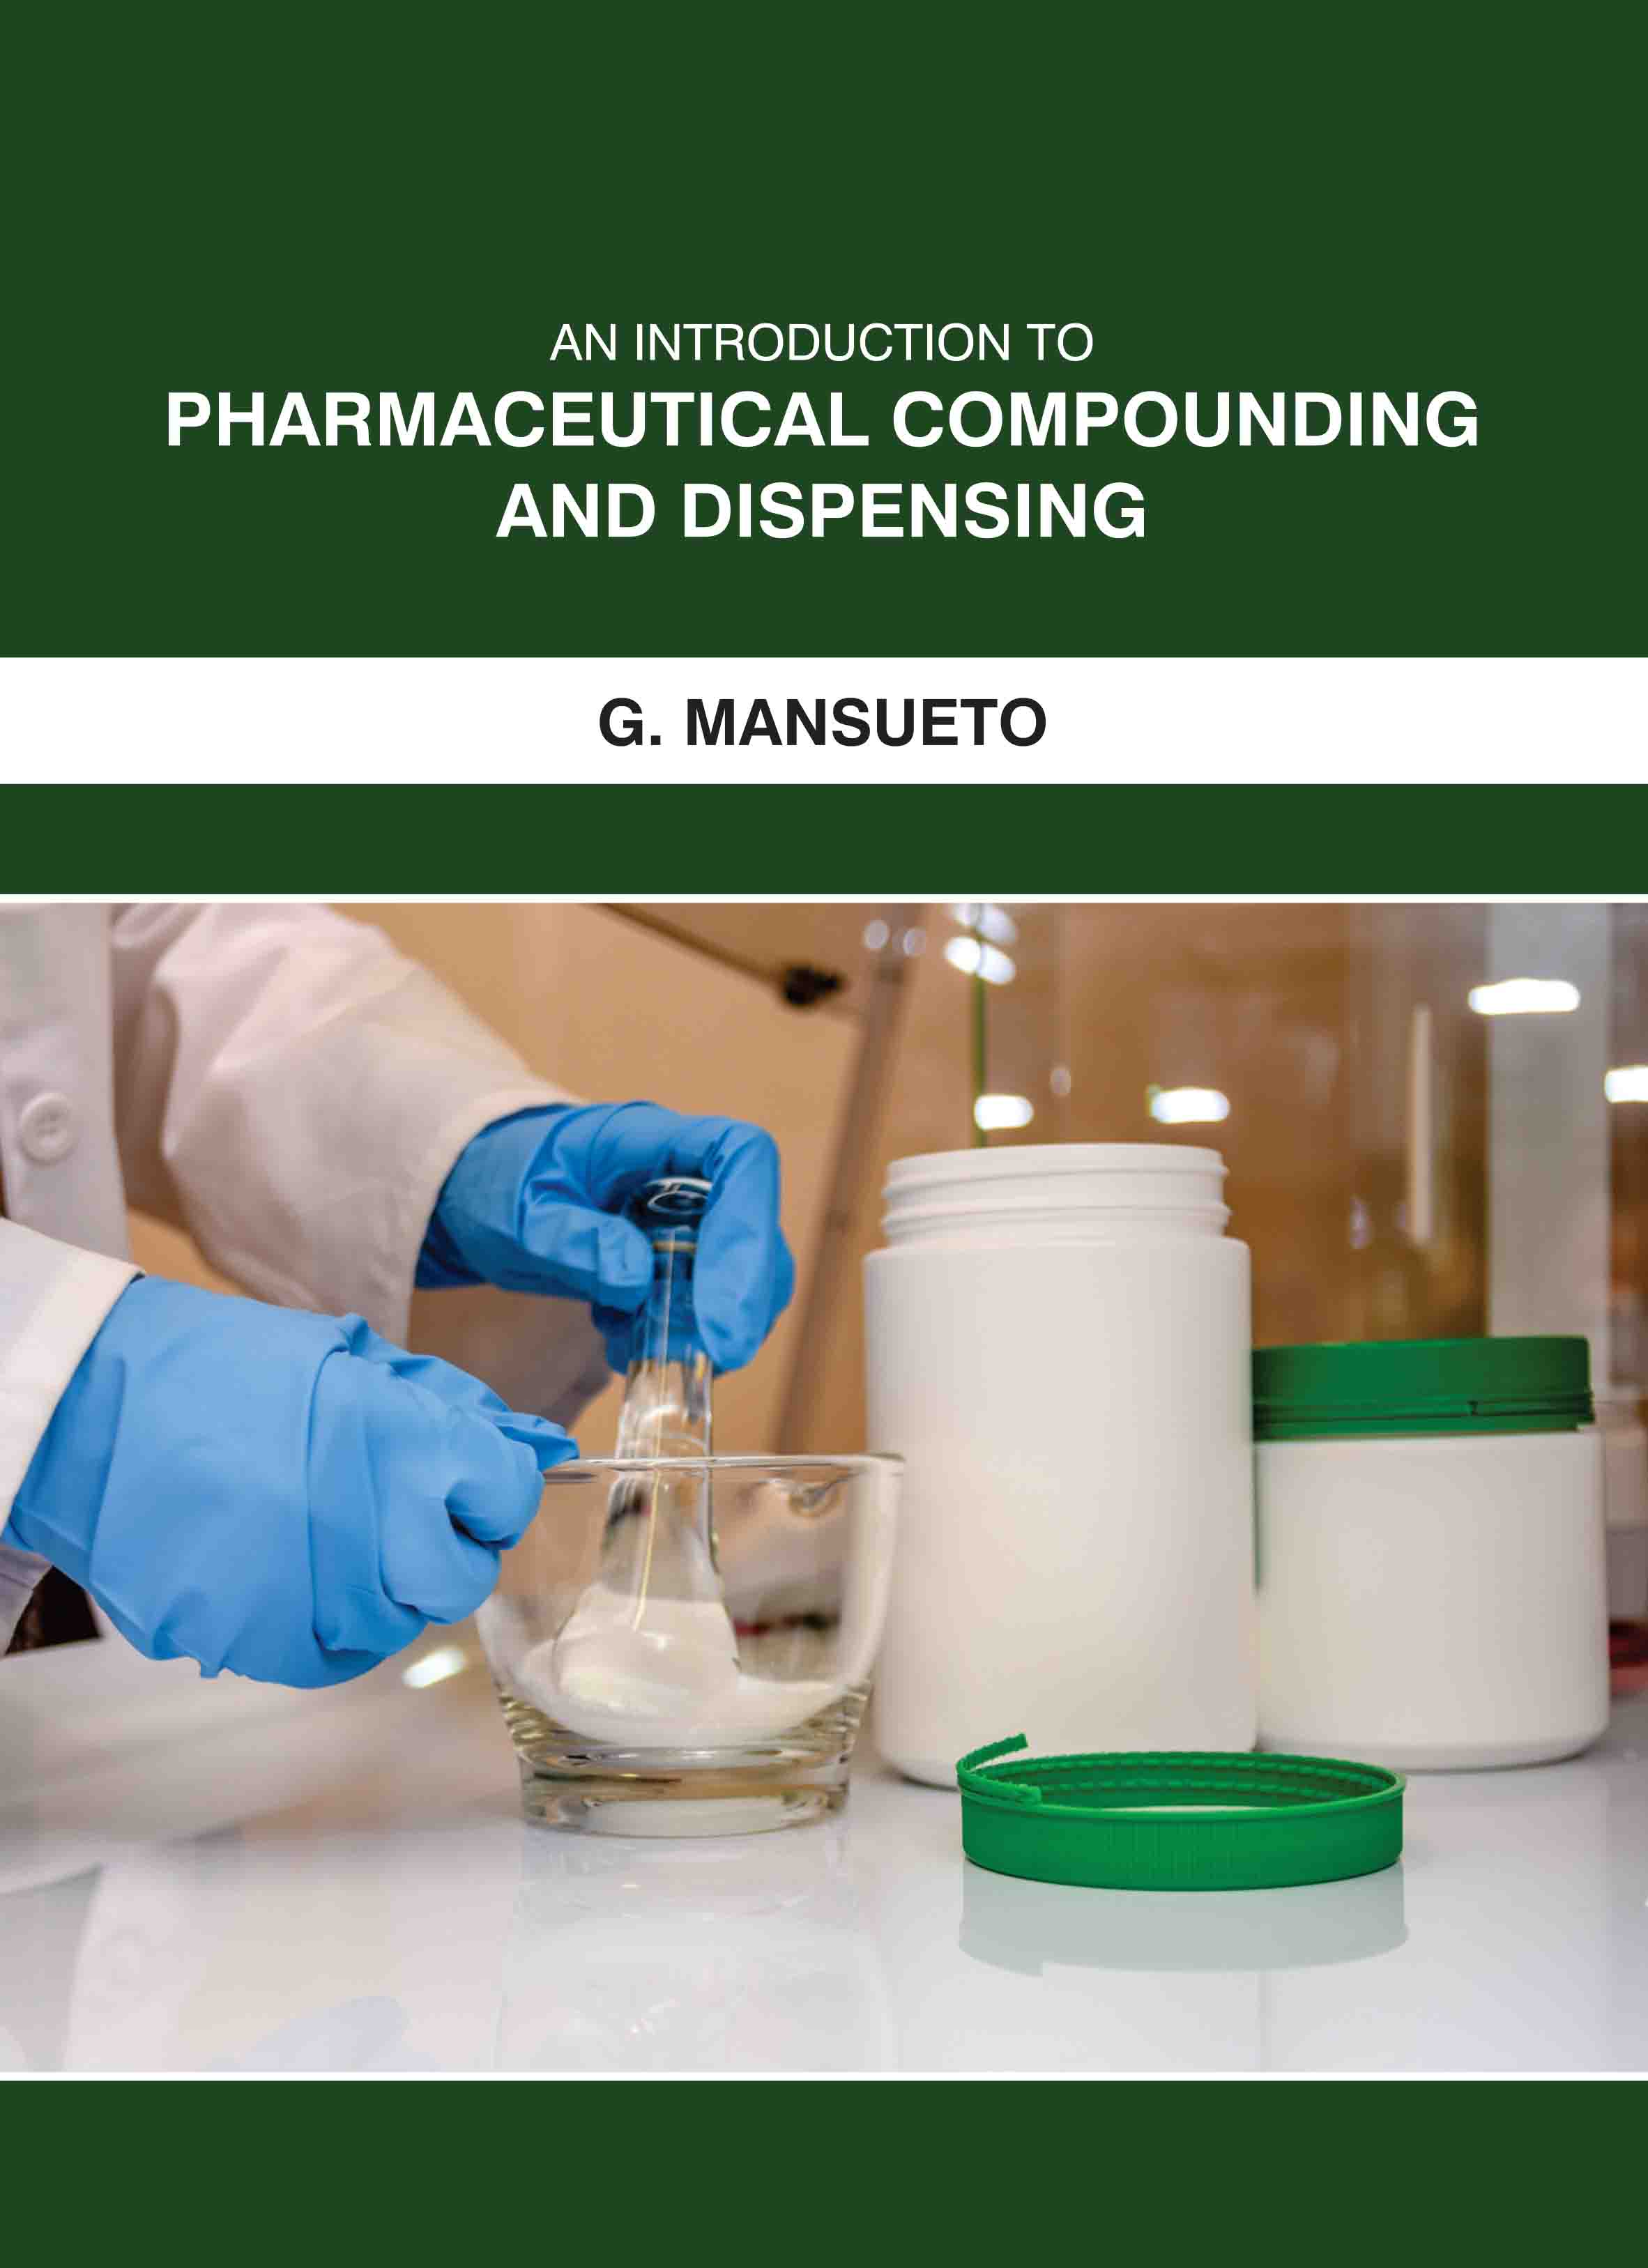 An Introduction to Pharmaceutical Compounding and Dispensing